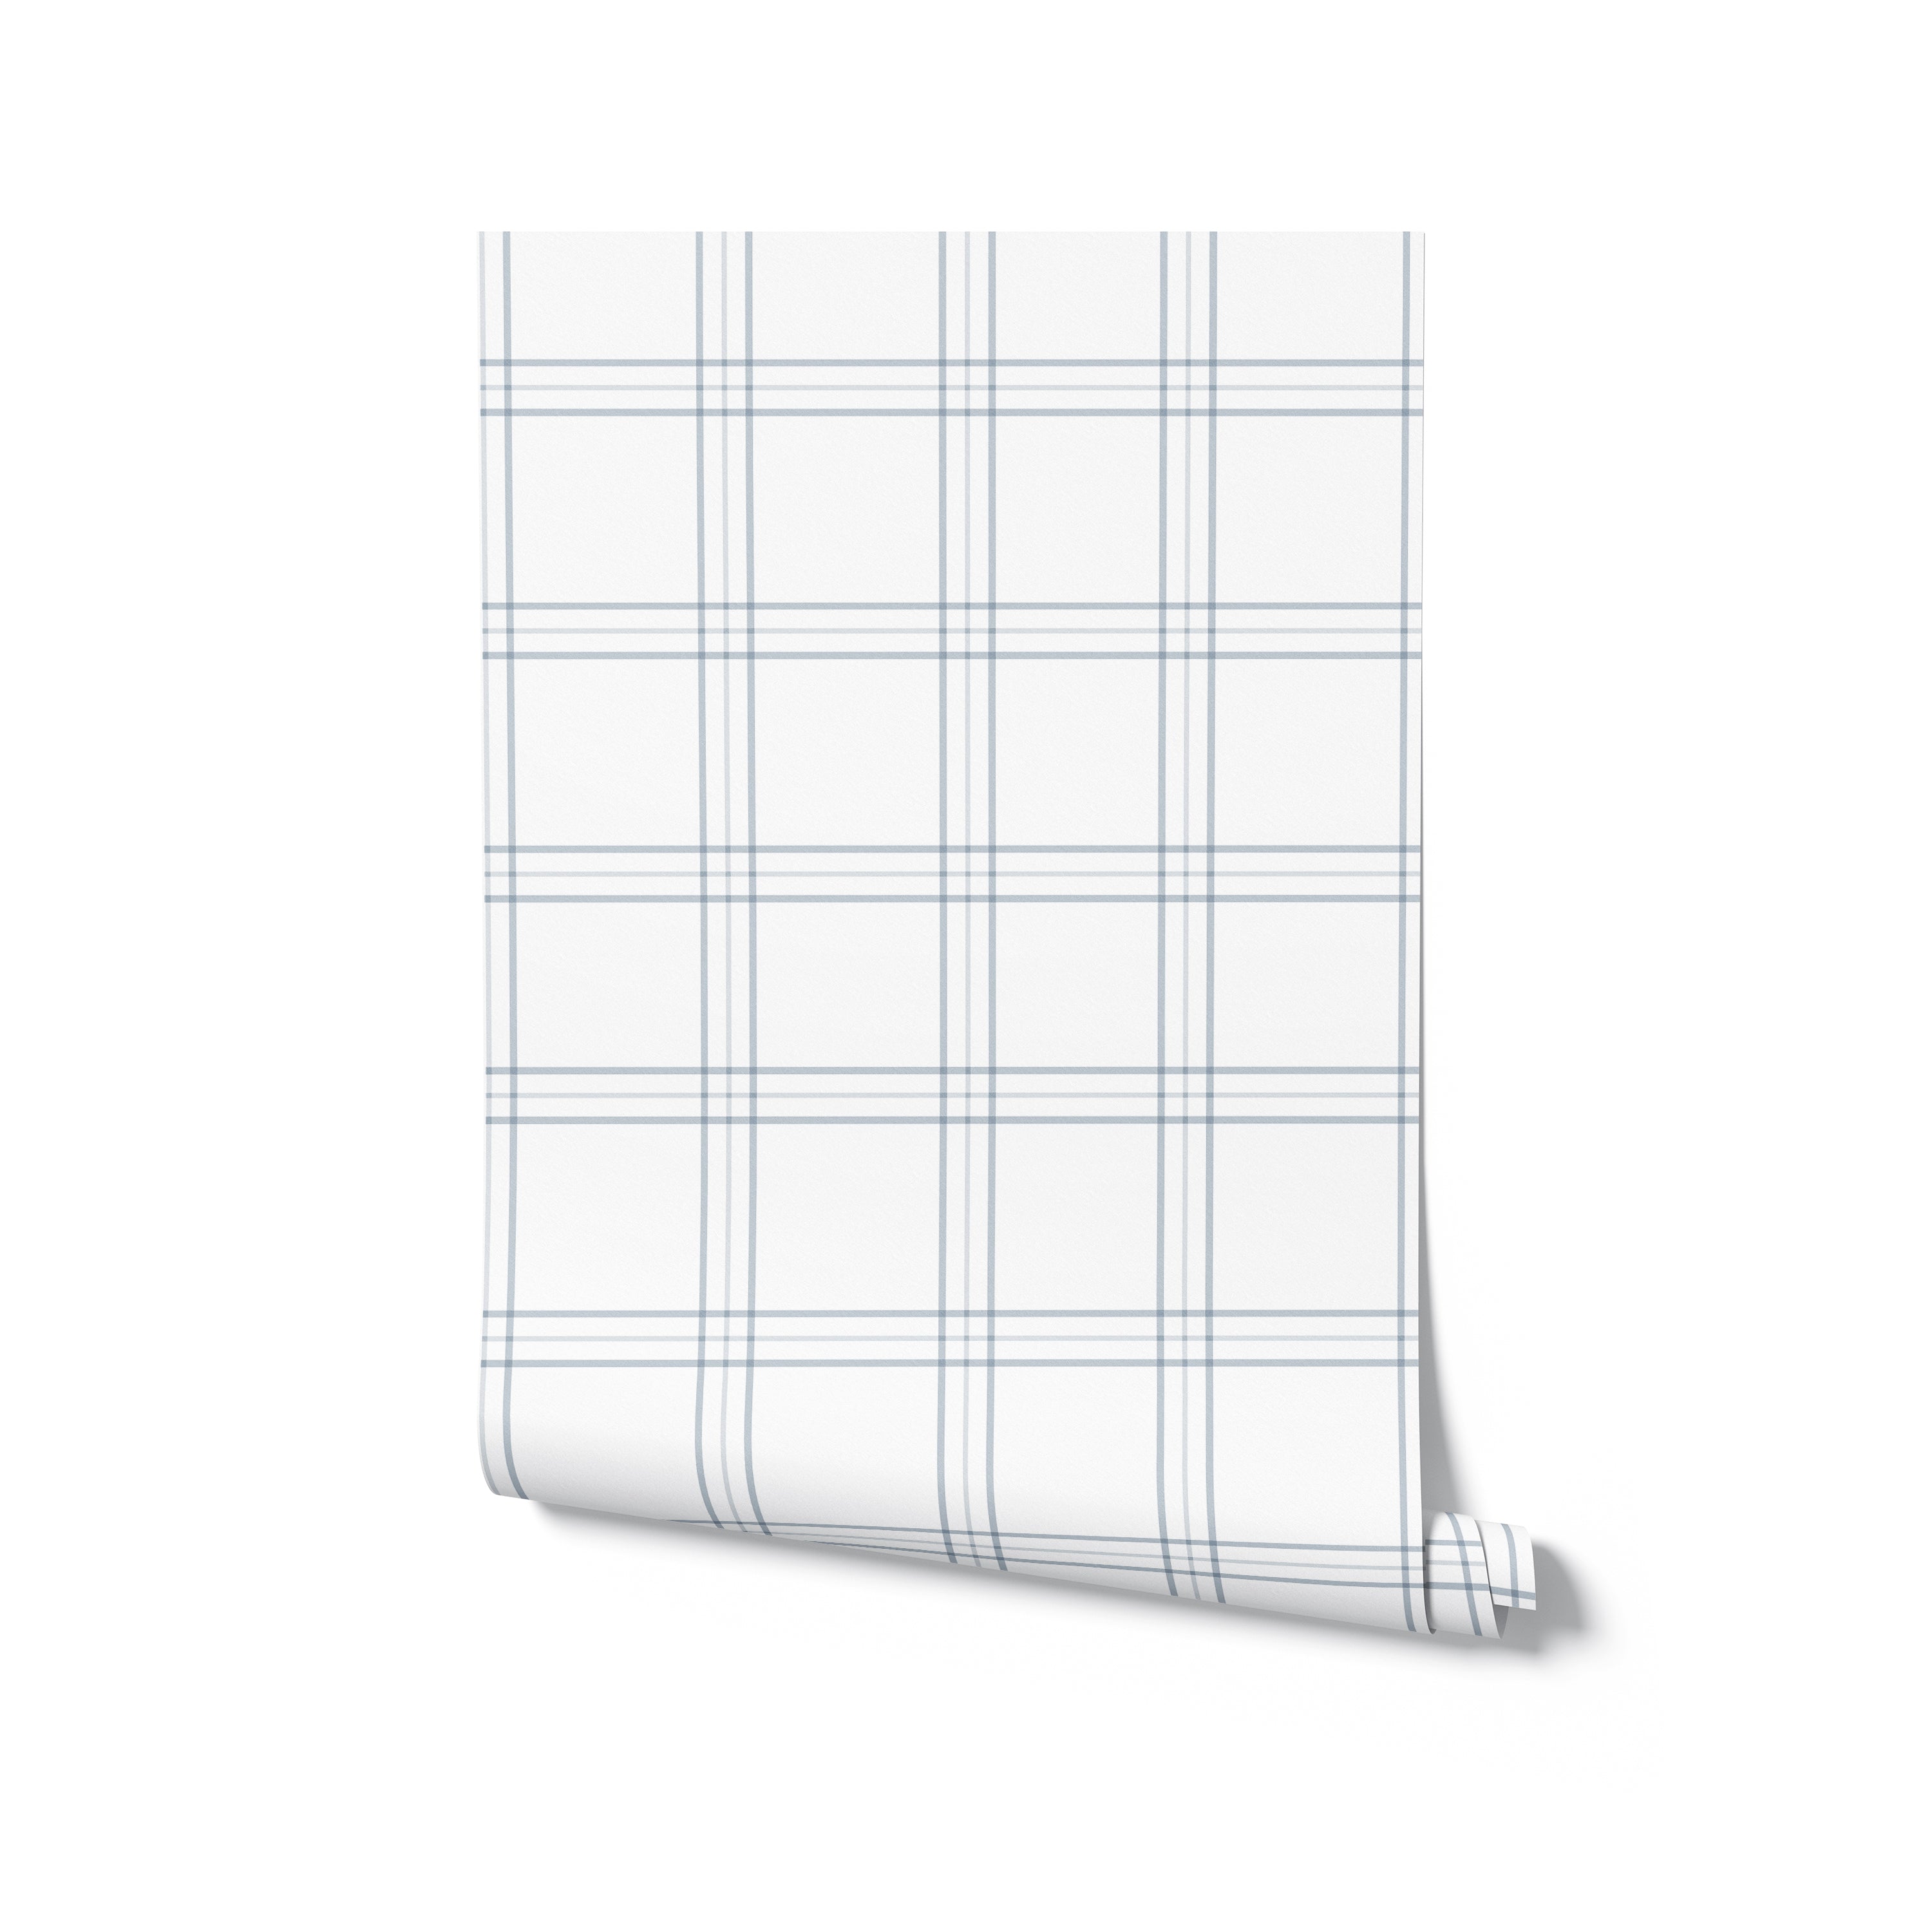 A rolled sample of Traditional Tartan Plaid Wallpaper highlighting the fabric-like texture and timeless pattern of pale blue stripes, suggesting a design that could bring a sense of heritage and comfort to interiors ranging from the modern to the classic.